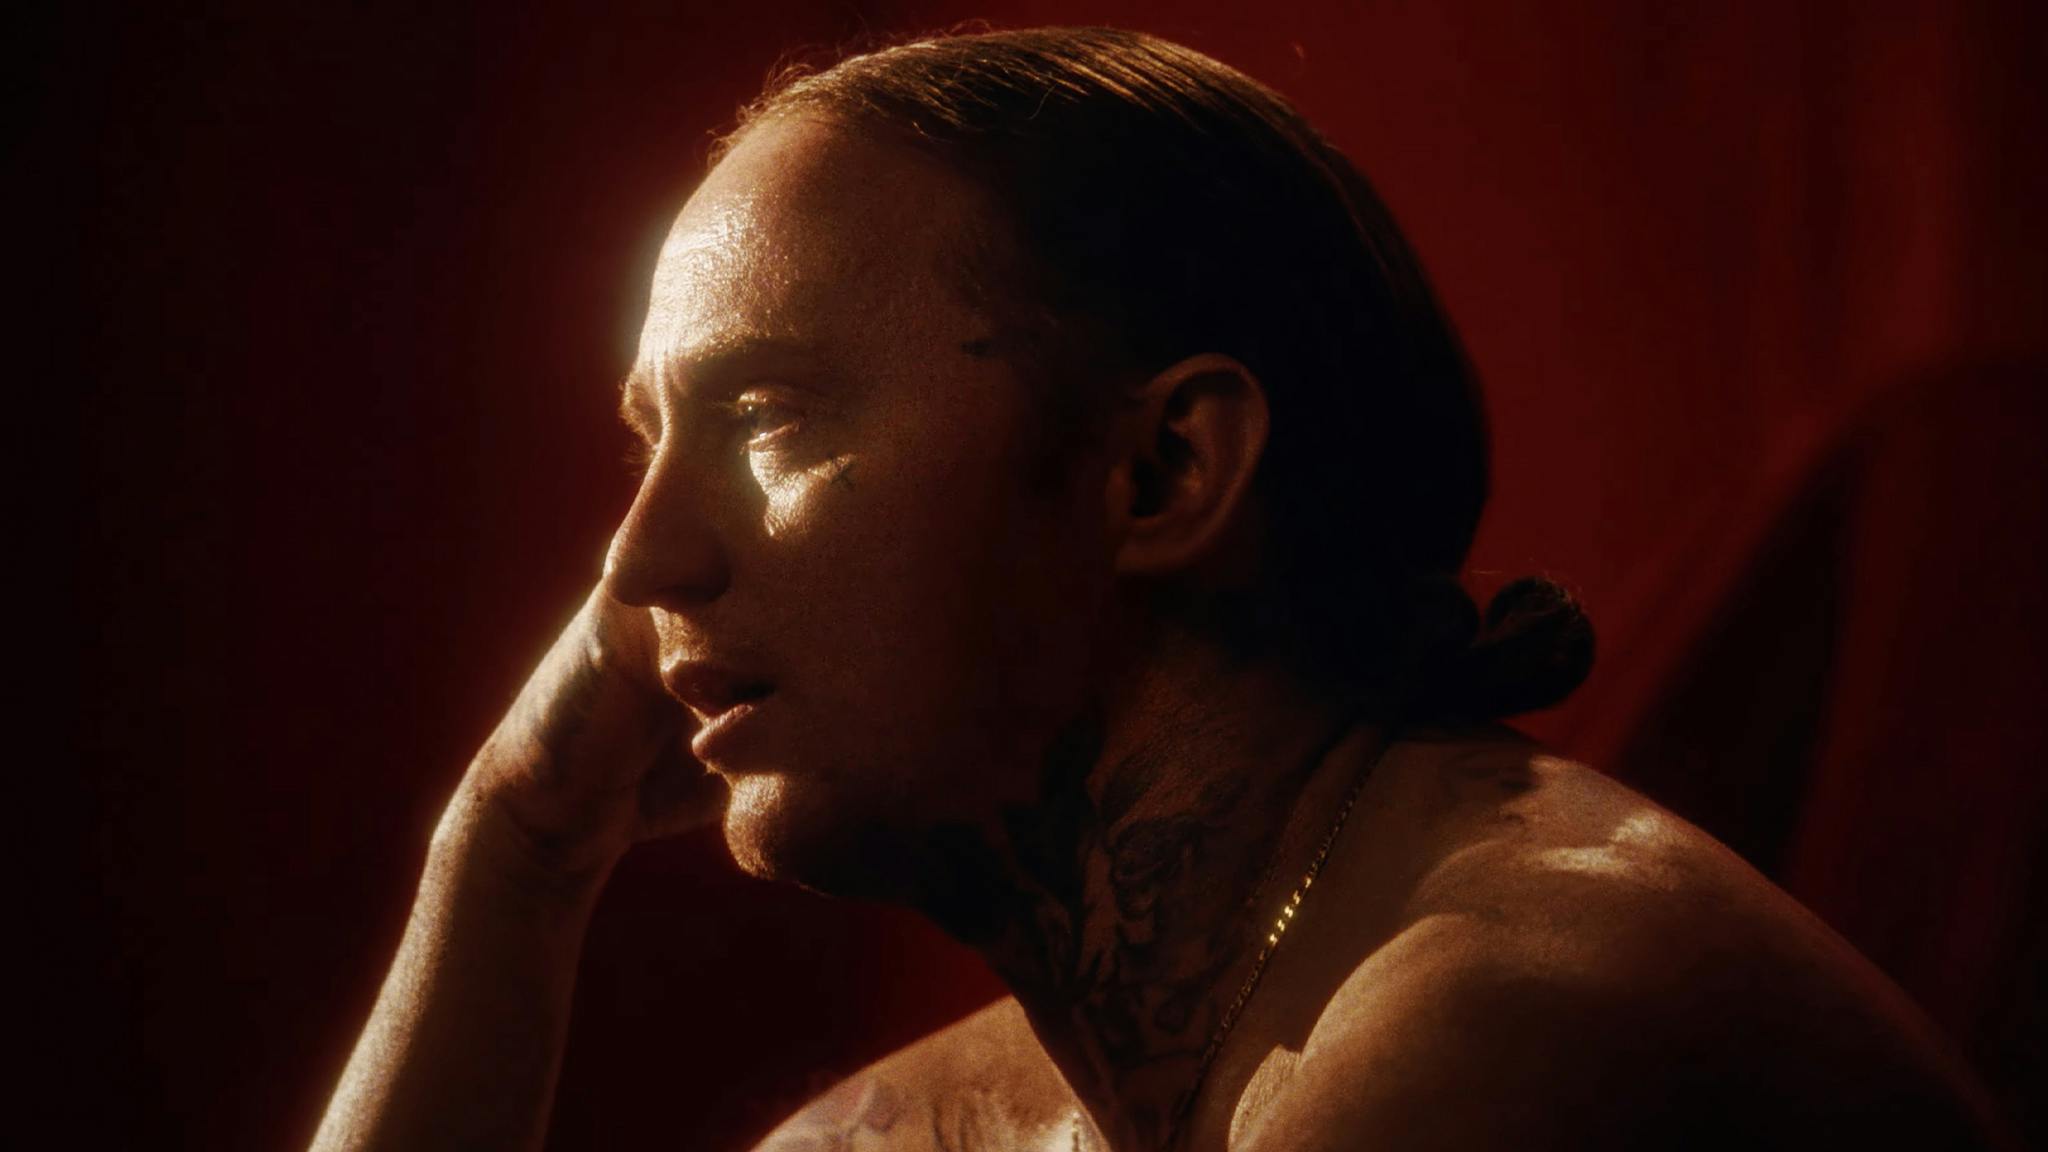 Watch the video for Frank Carter & The Rattlesnakes’ new single, Self Love